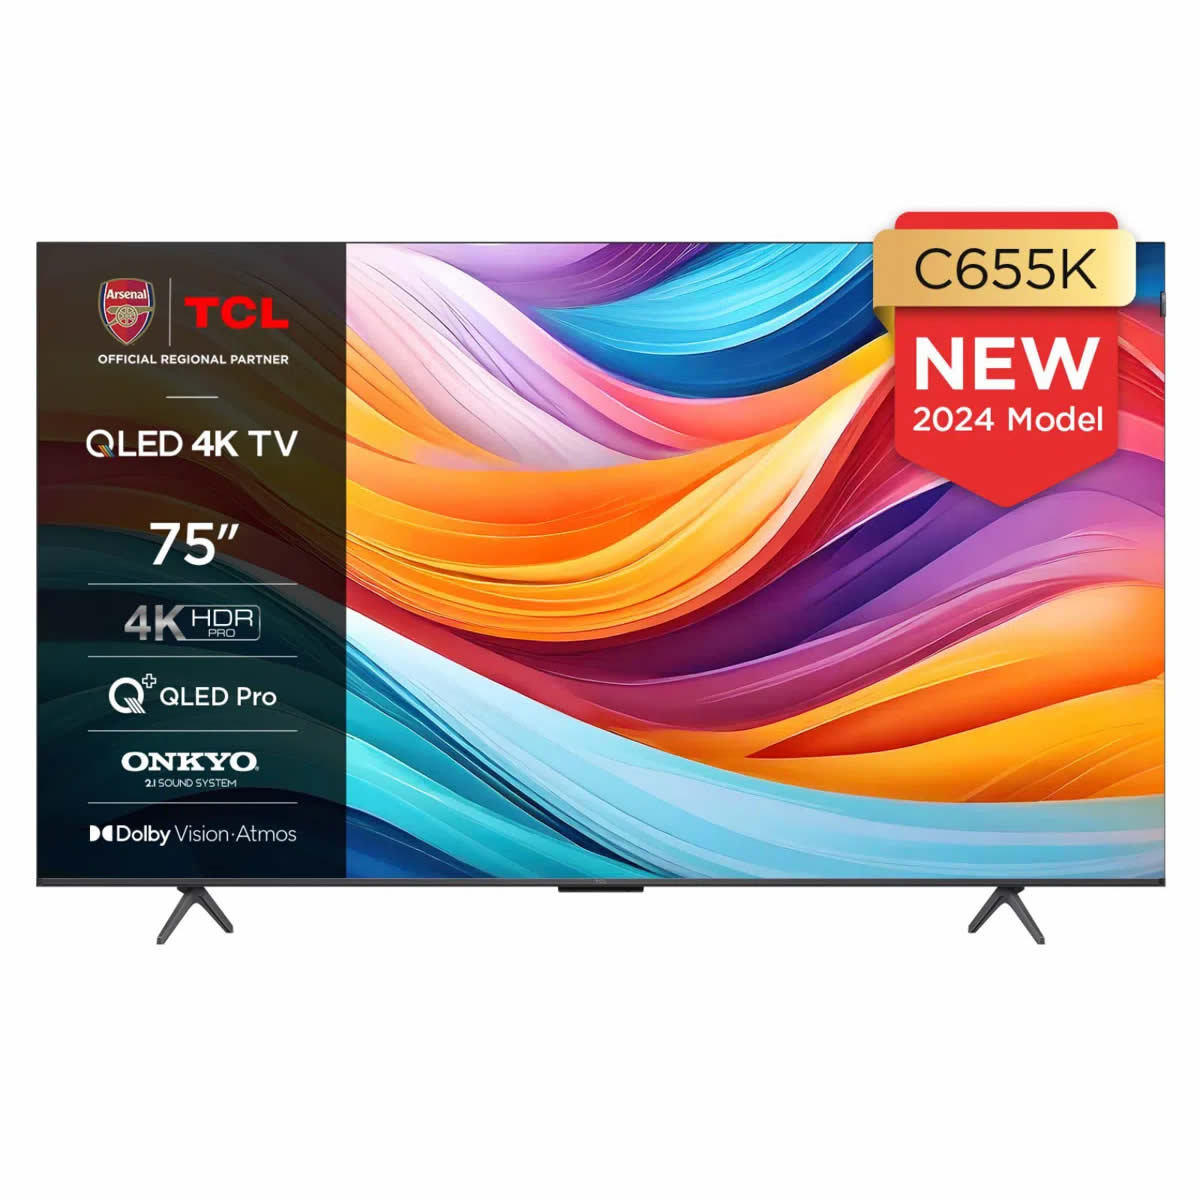 TCL 75inch 4K QLED PRO SMART TV WiFi Freeview HD Google